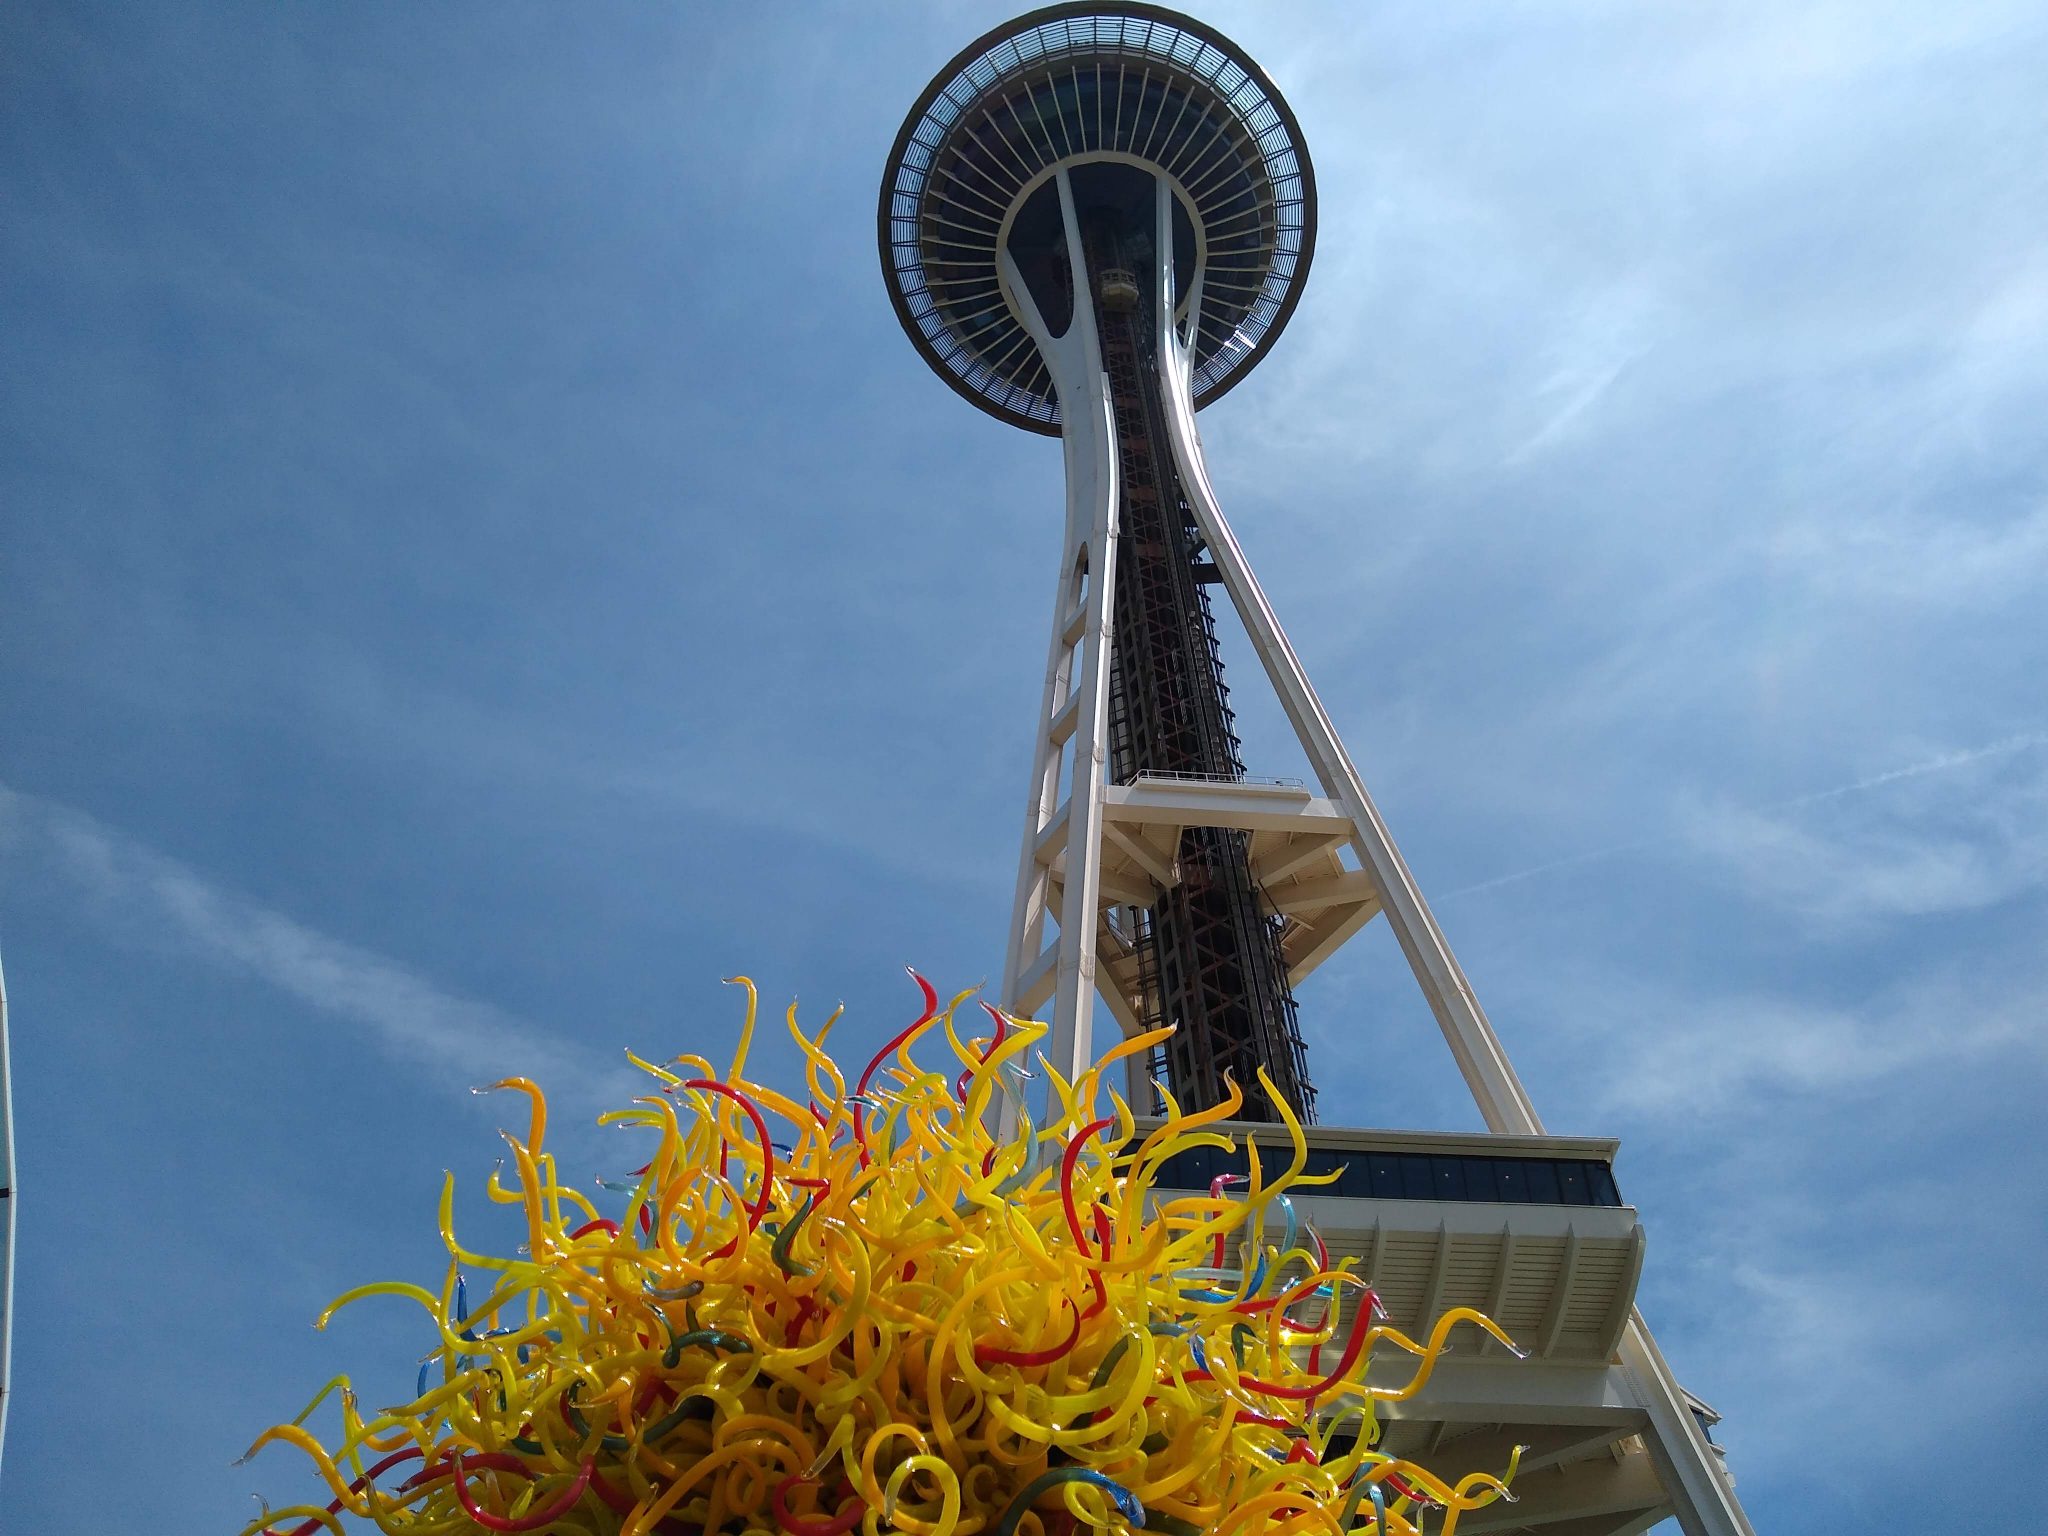 A view of the Space Needle from below on a sunny day. There is a yellow and red glass sculpture below it